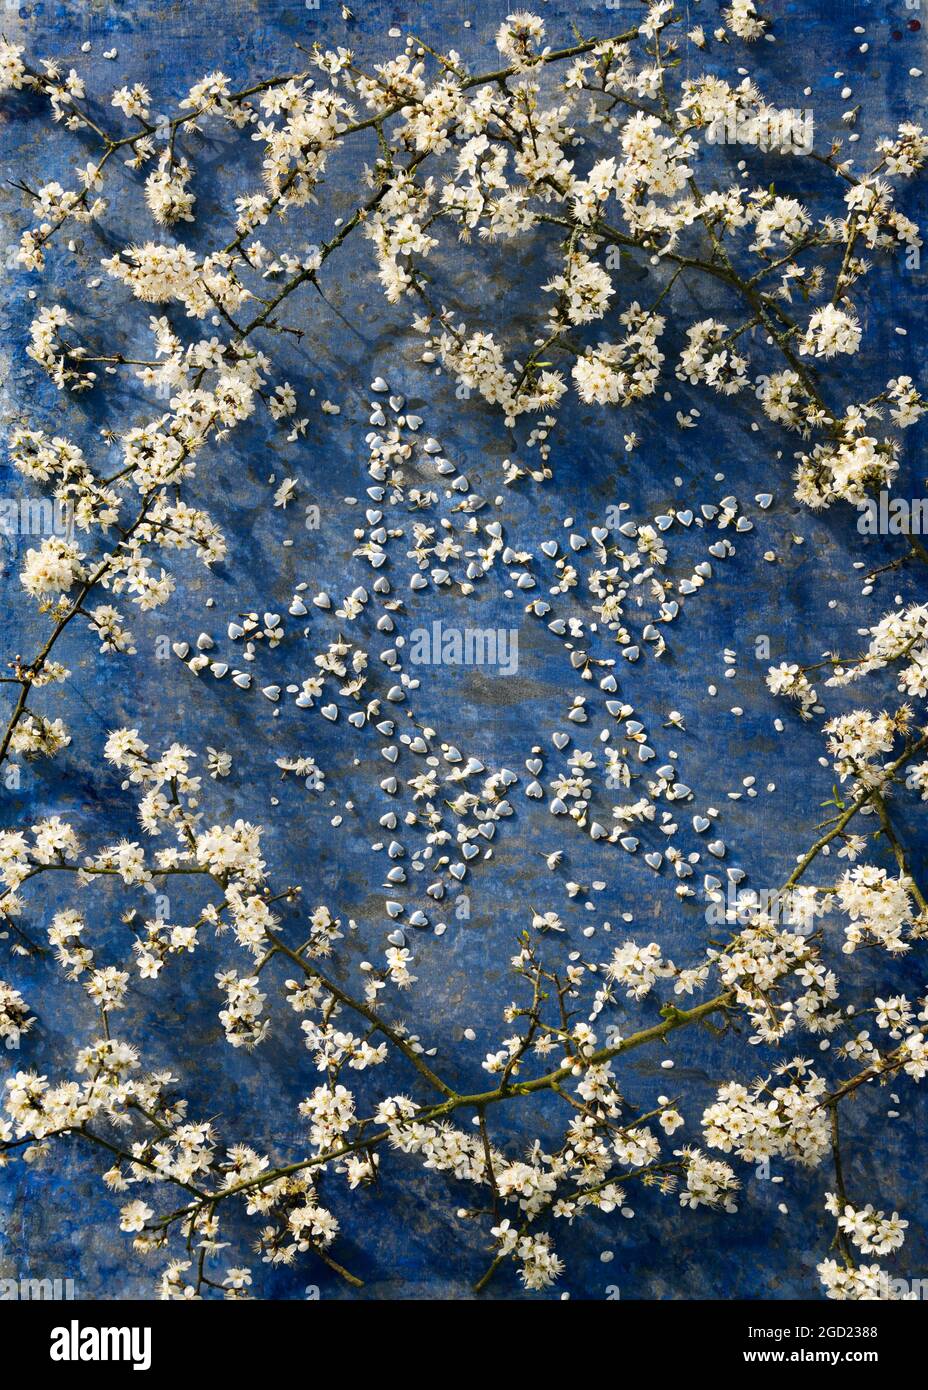 Star shape made from tiny silver hearts surrounded by branches of blackthorn blossom. Stock Photo